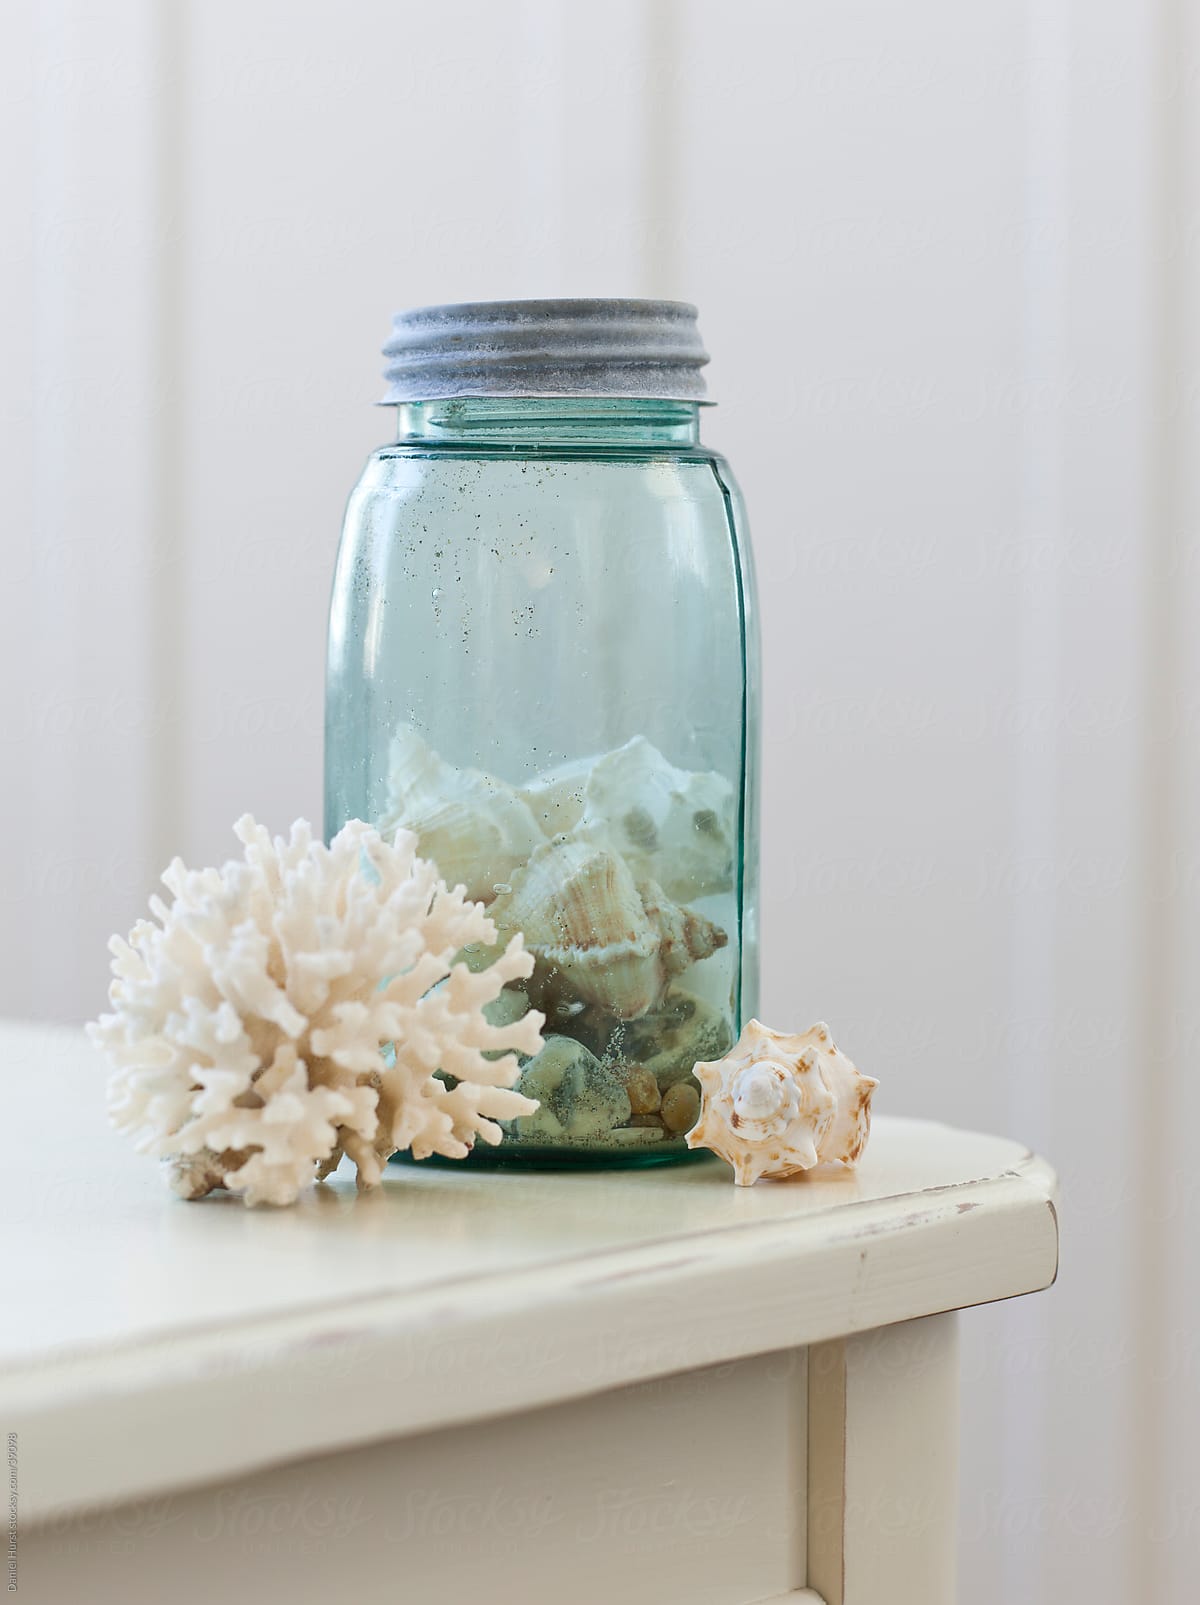 Jar of shells and coral